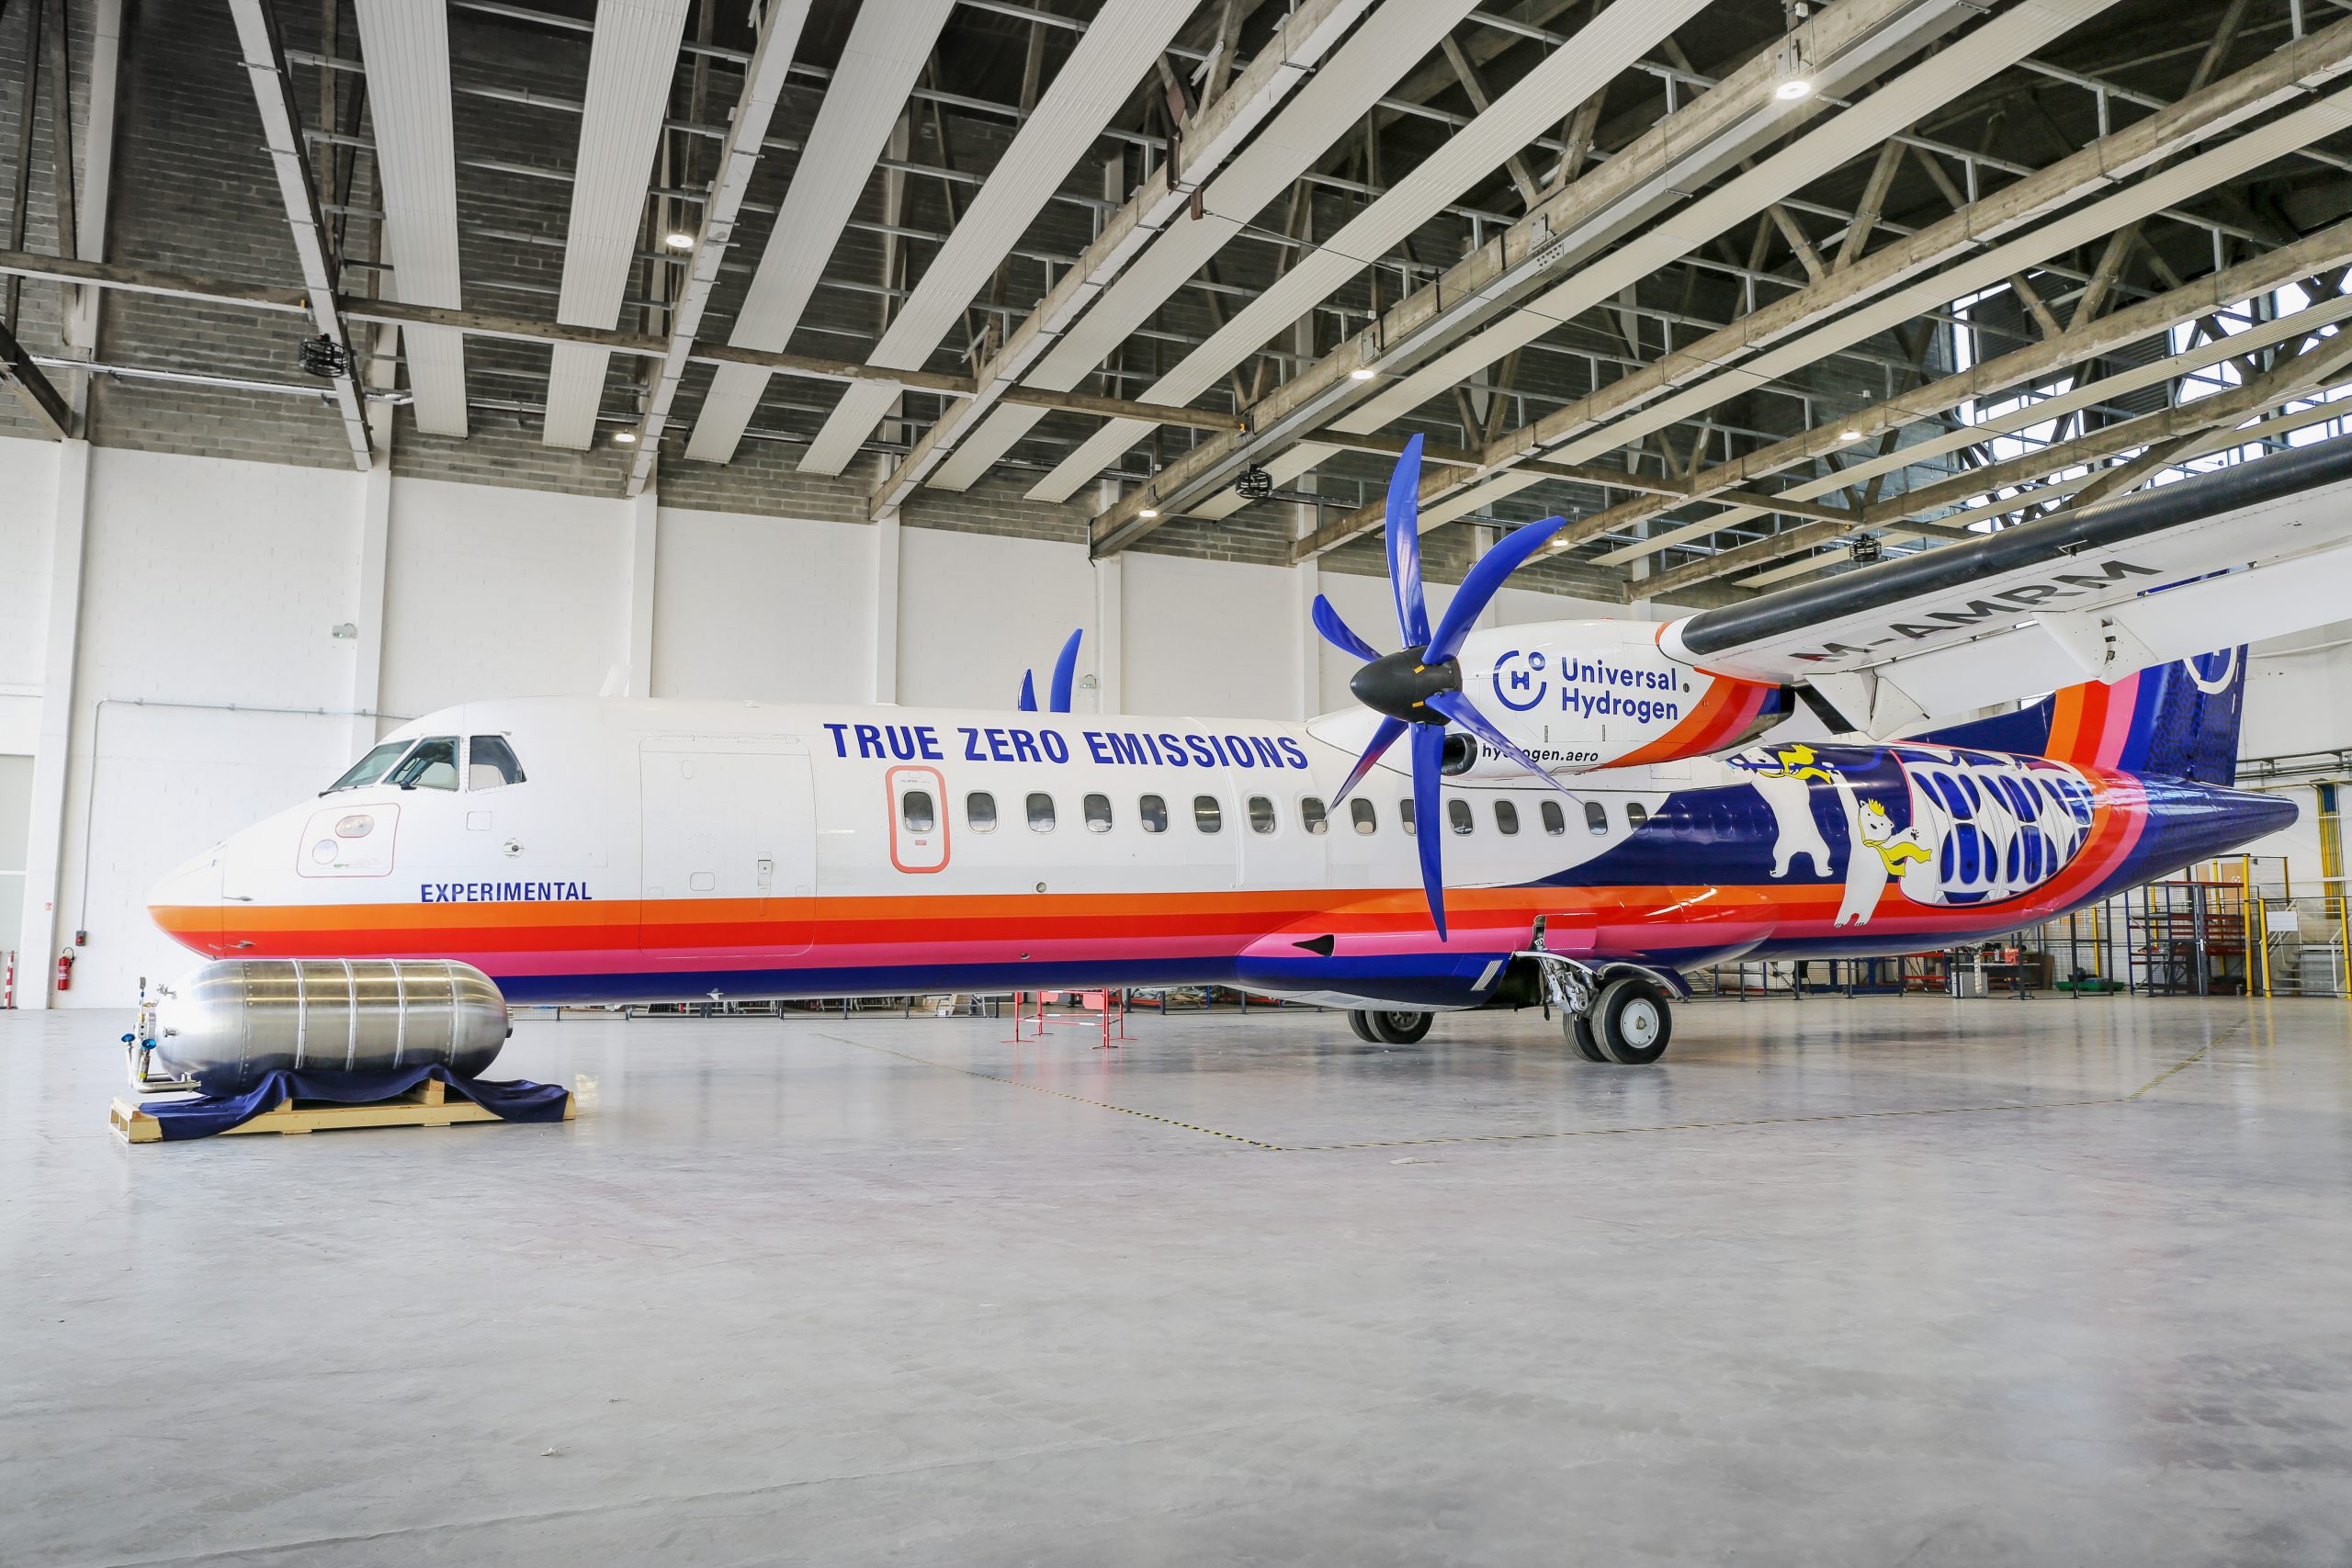 Universal Hydrogen's newly-liveried ATR 72 test aircraft used for developing the hydrogen retrofit kit and hydrogen module operational handling experiments.